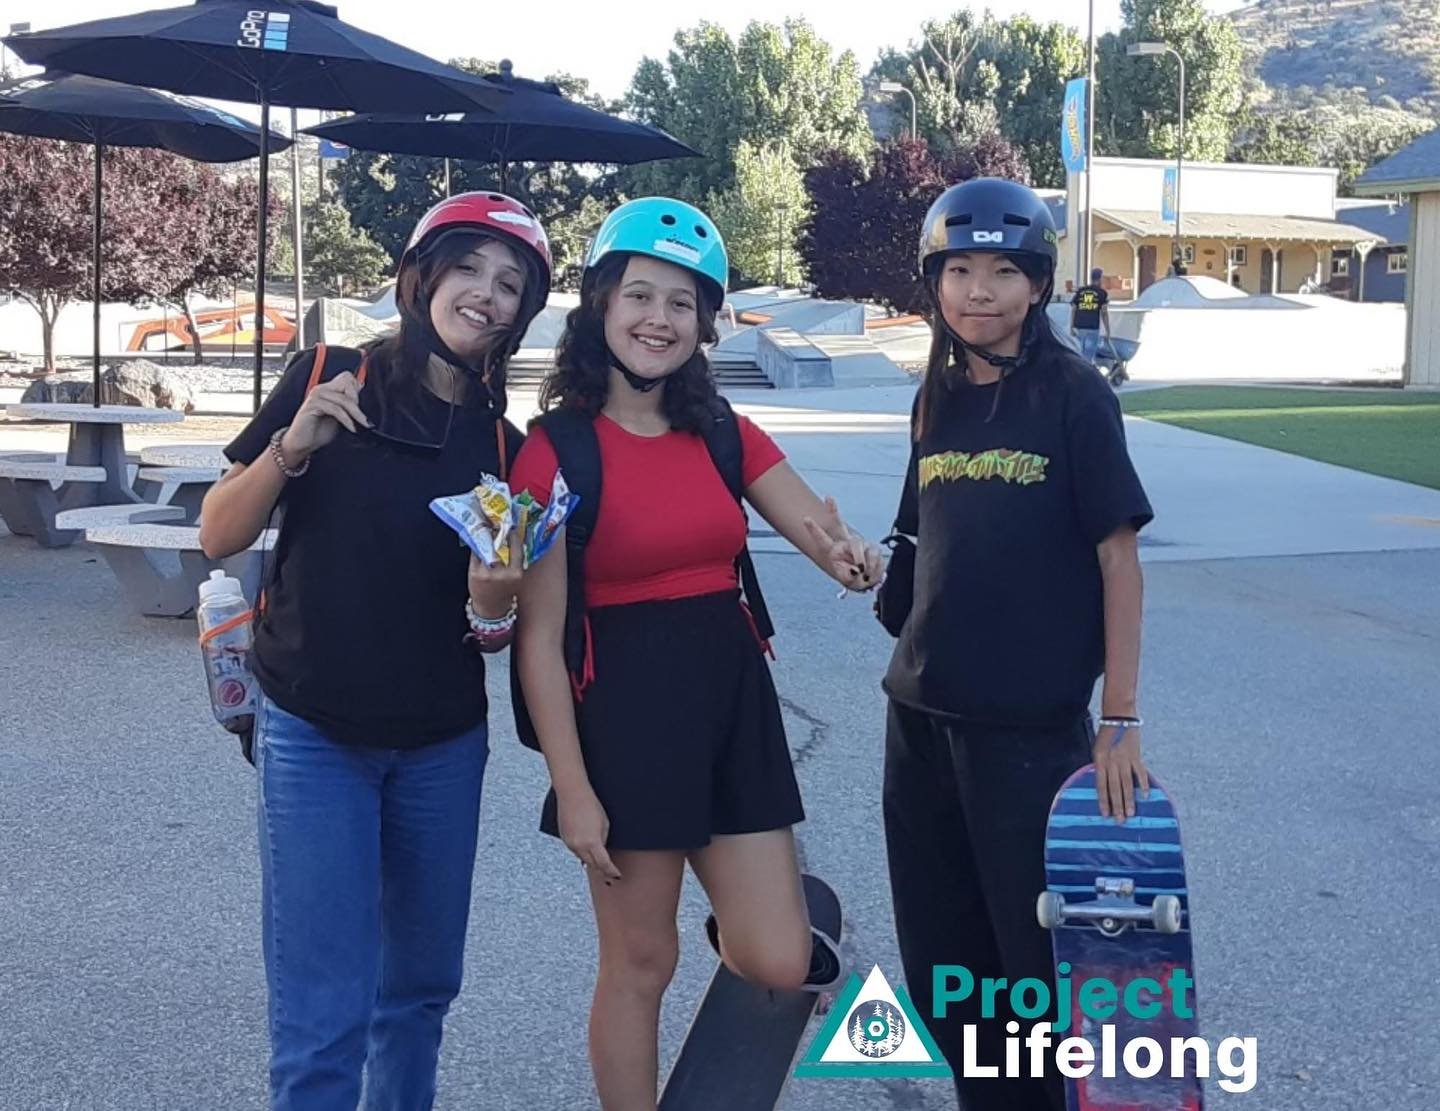 It&rsquo;s Big Day of Giving! We want to tell you about our Team Lifelong Skate Camp Scholarships!! This year we budgeted to send our teen volunteers to skate camp with these other amazing skate programs! @skatelikeagirl  @skatewild @yskatecamp  Your